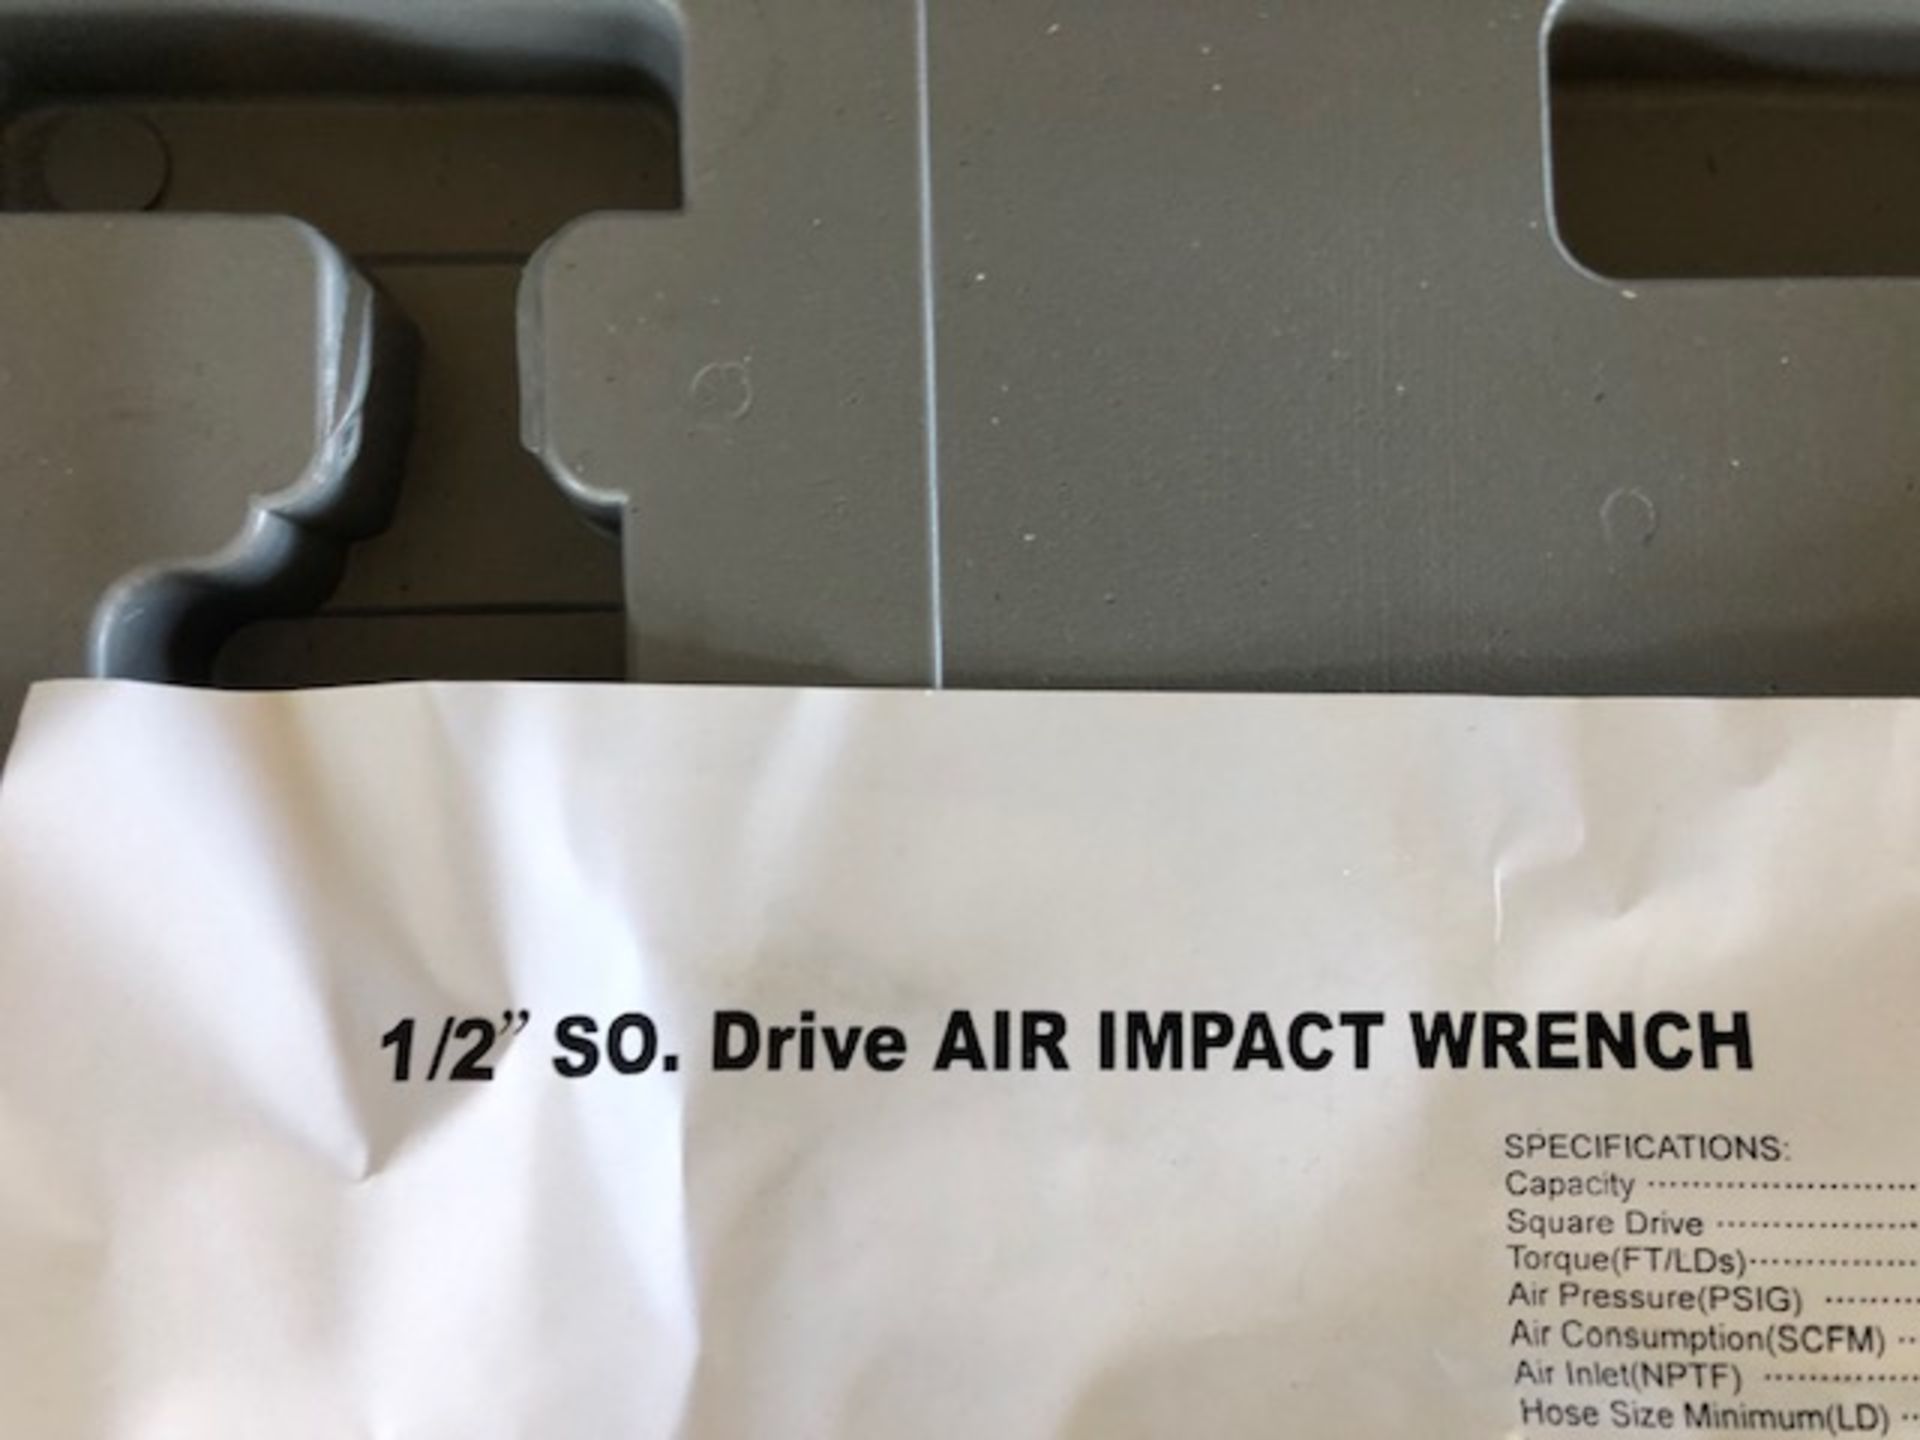 2021 1/2" Air Impact Wrench Kit - Image 2 of 2